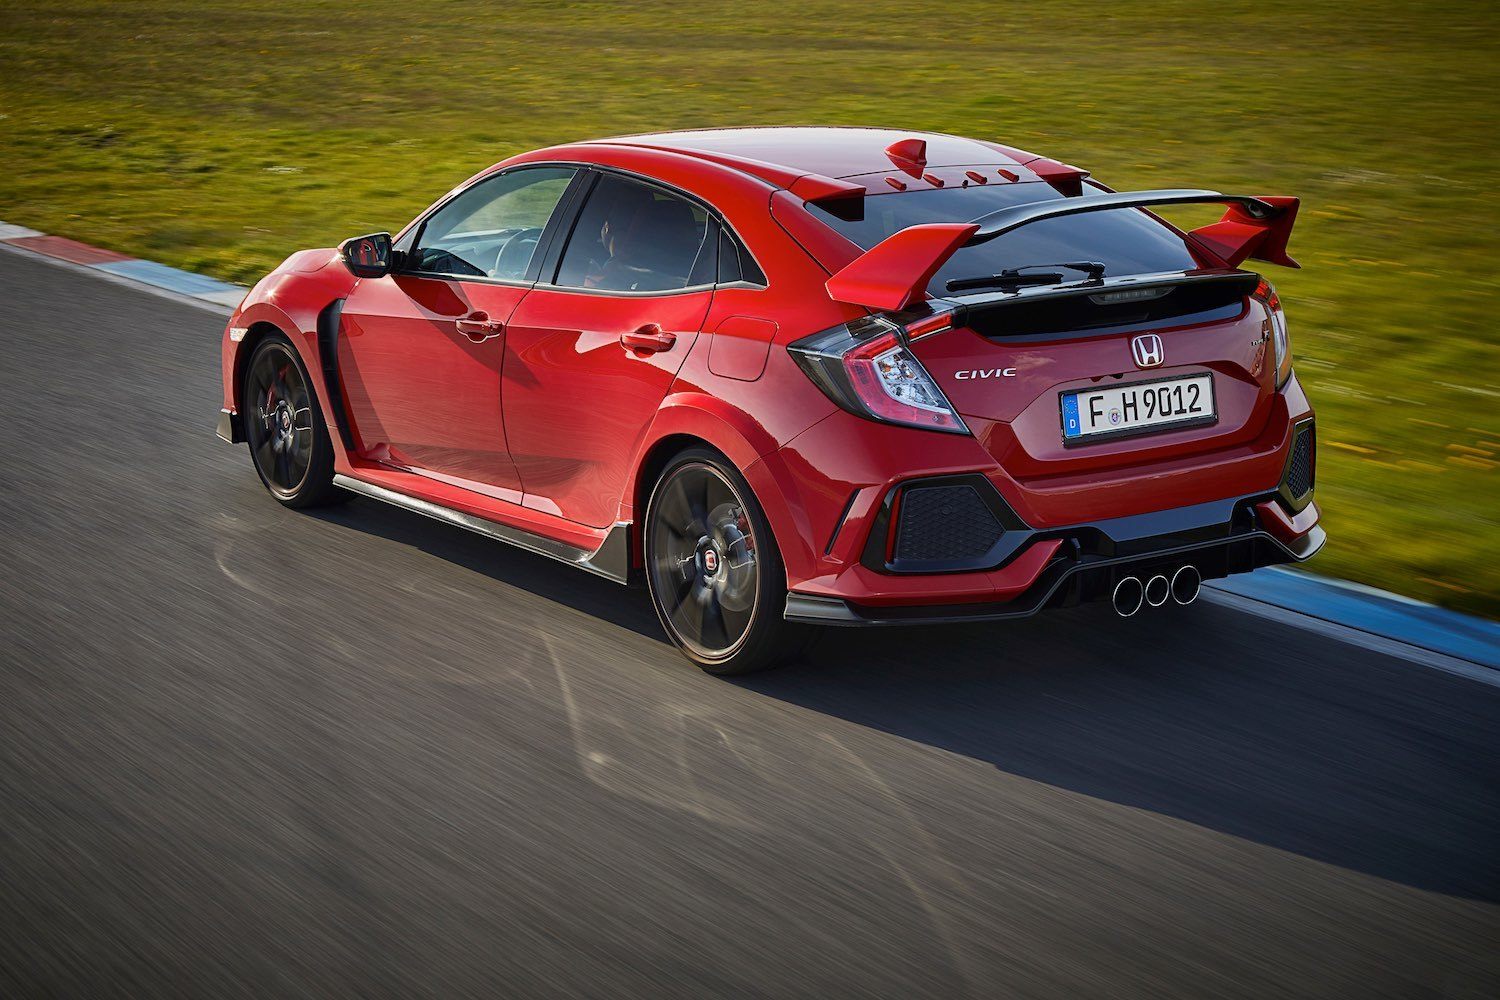 Tim Barnes-Clay reviews the 2018 Honda Civic Type R at the first drives 9